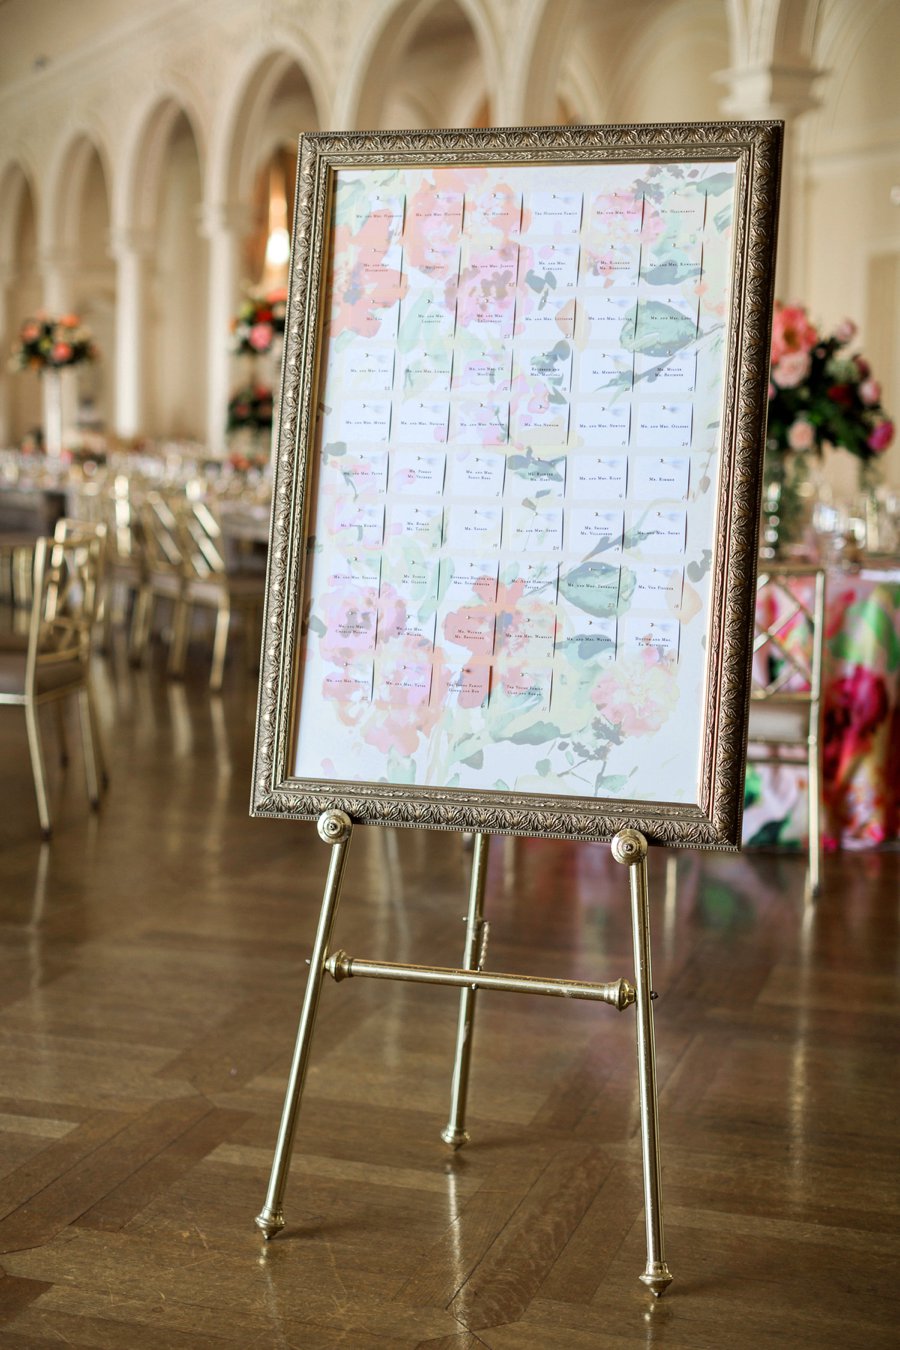 An Elegant Floral Inspired Southern Wedding via TheELD.com